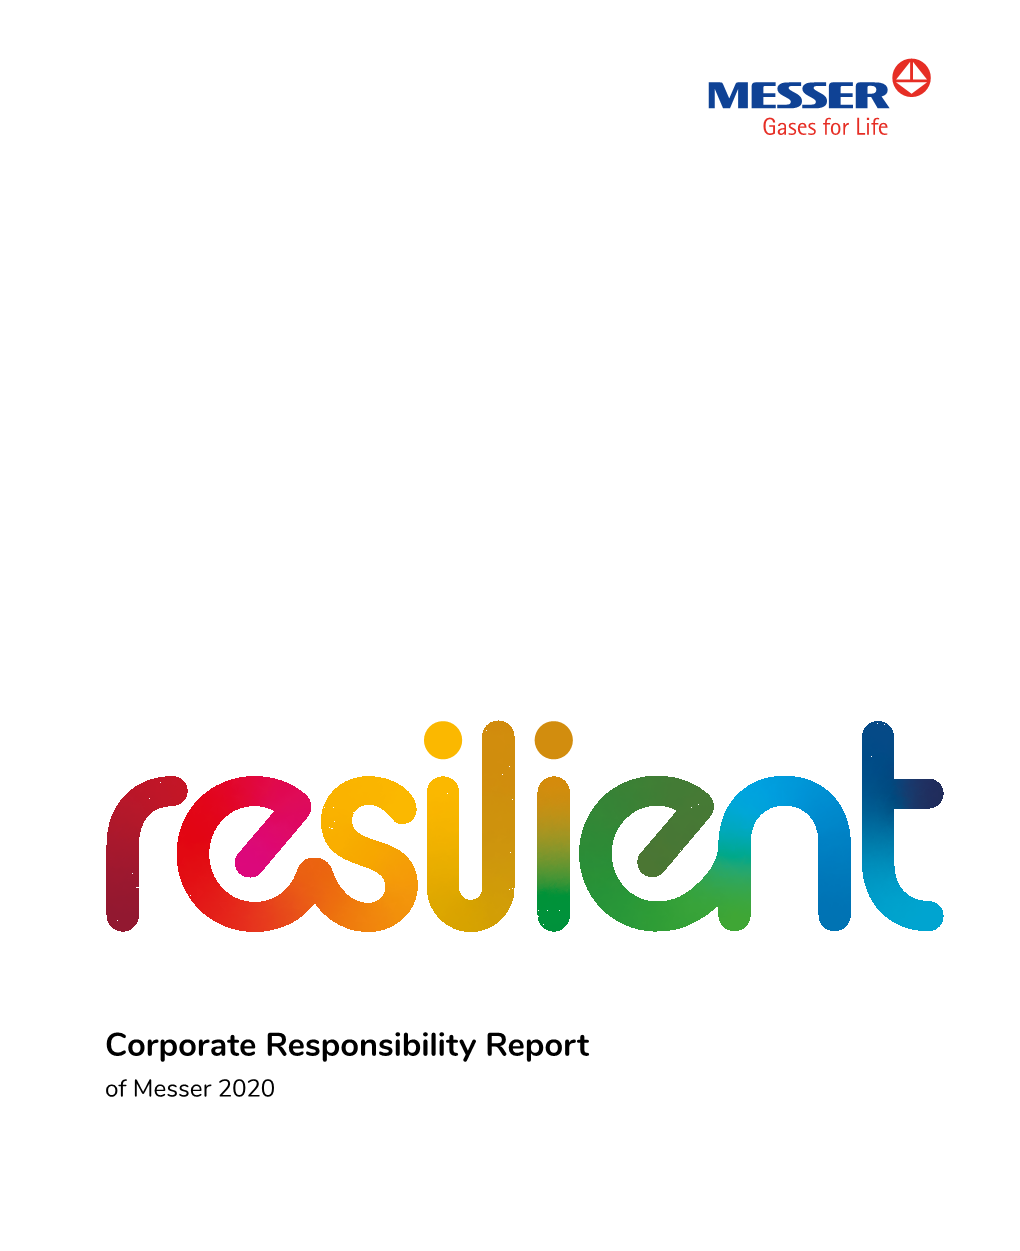 Corporate Responsibility Report of Messer 2020 2 Corporate Responsibility Report of Messer 2020